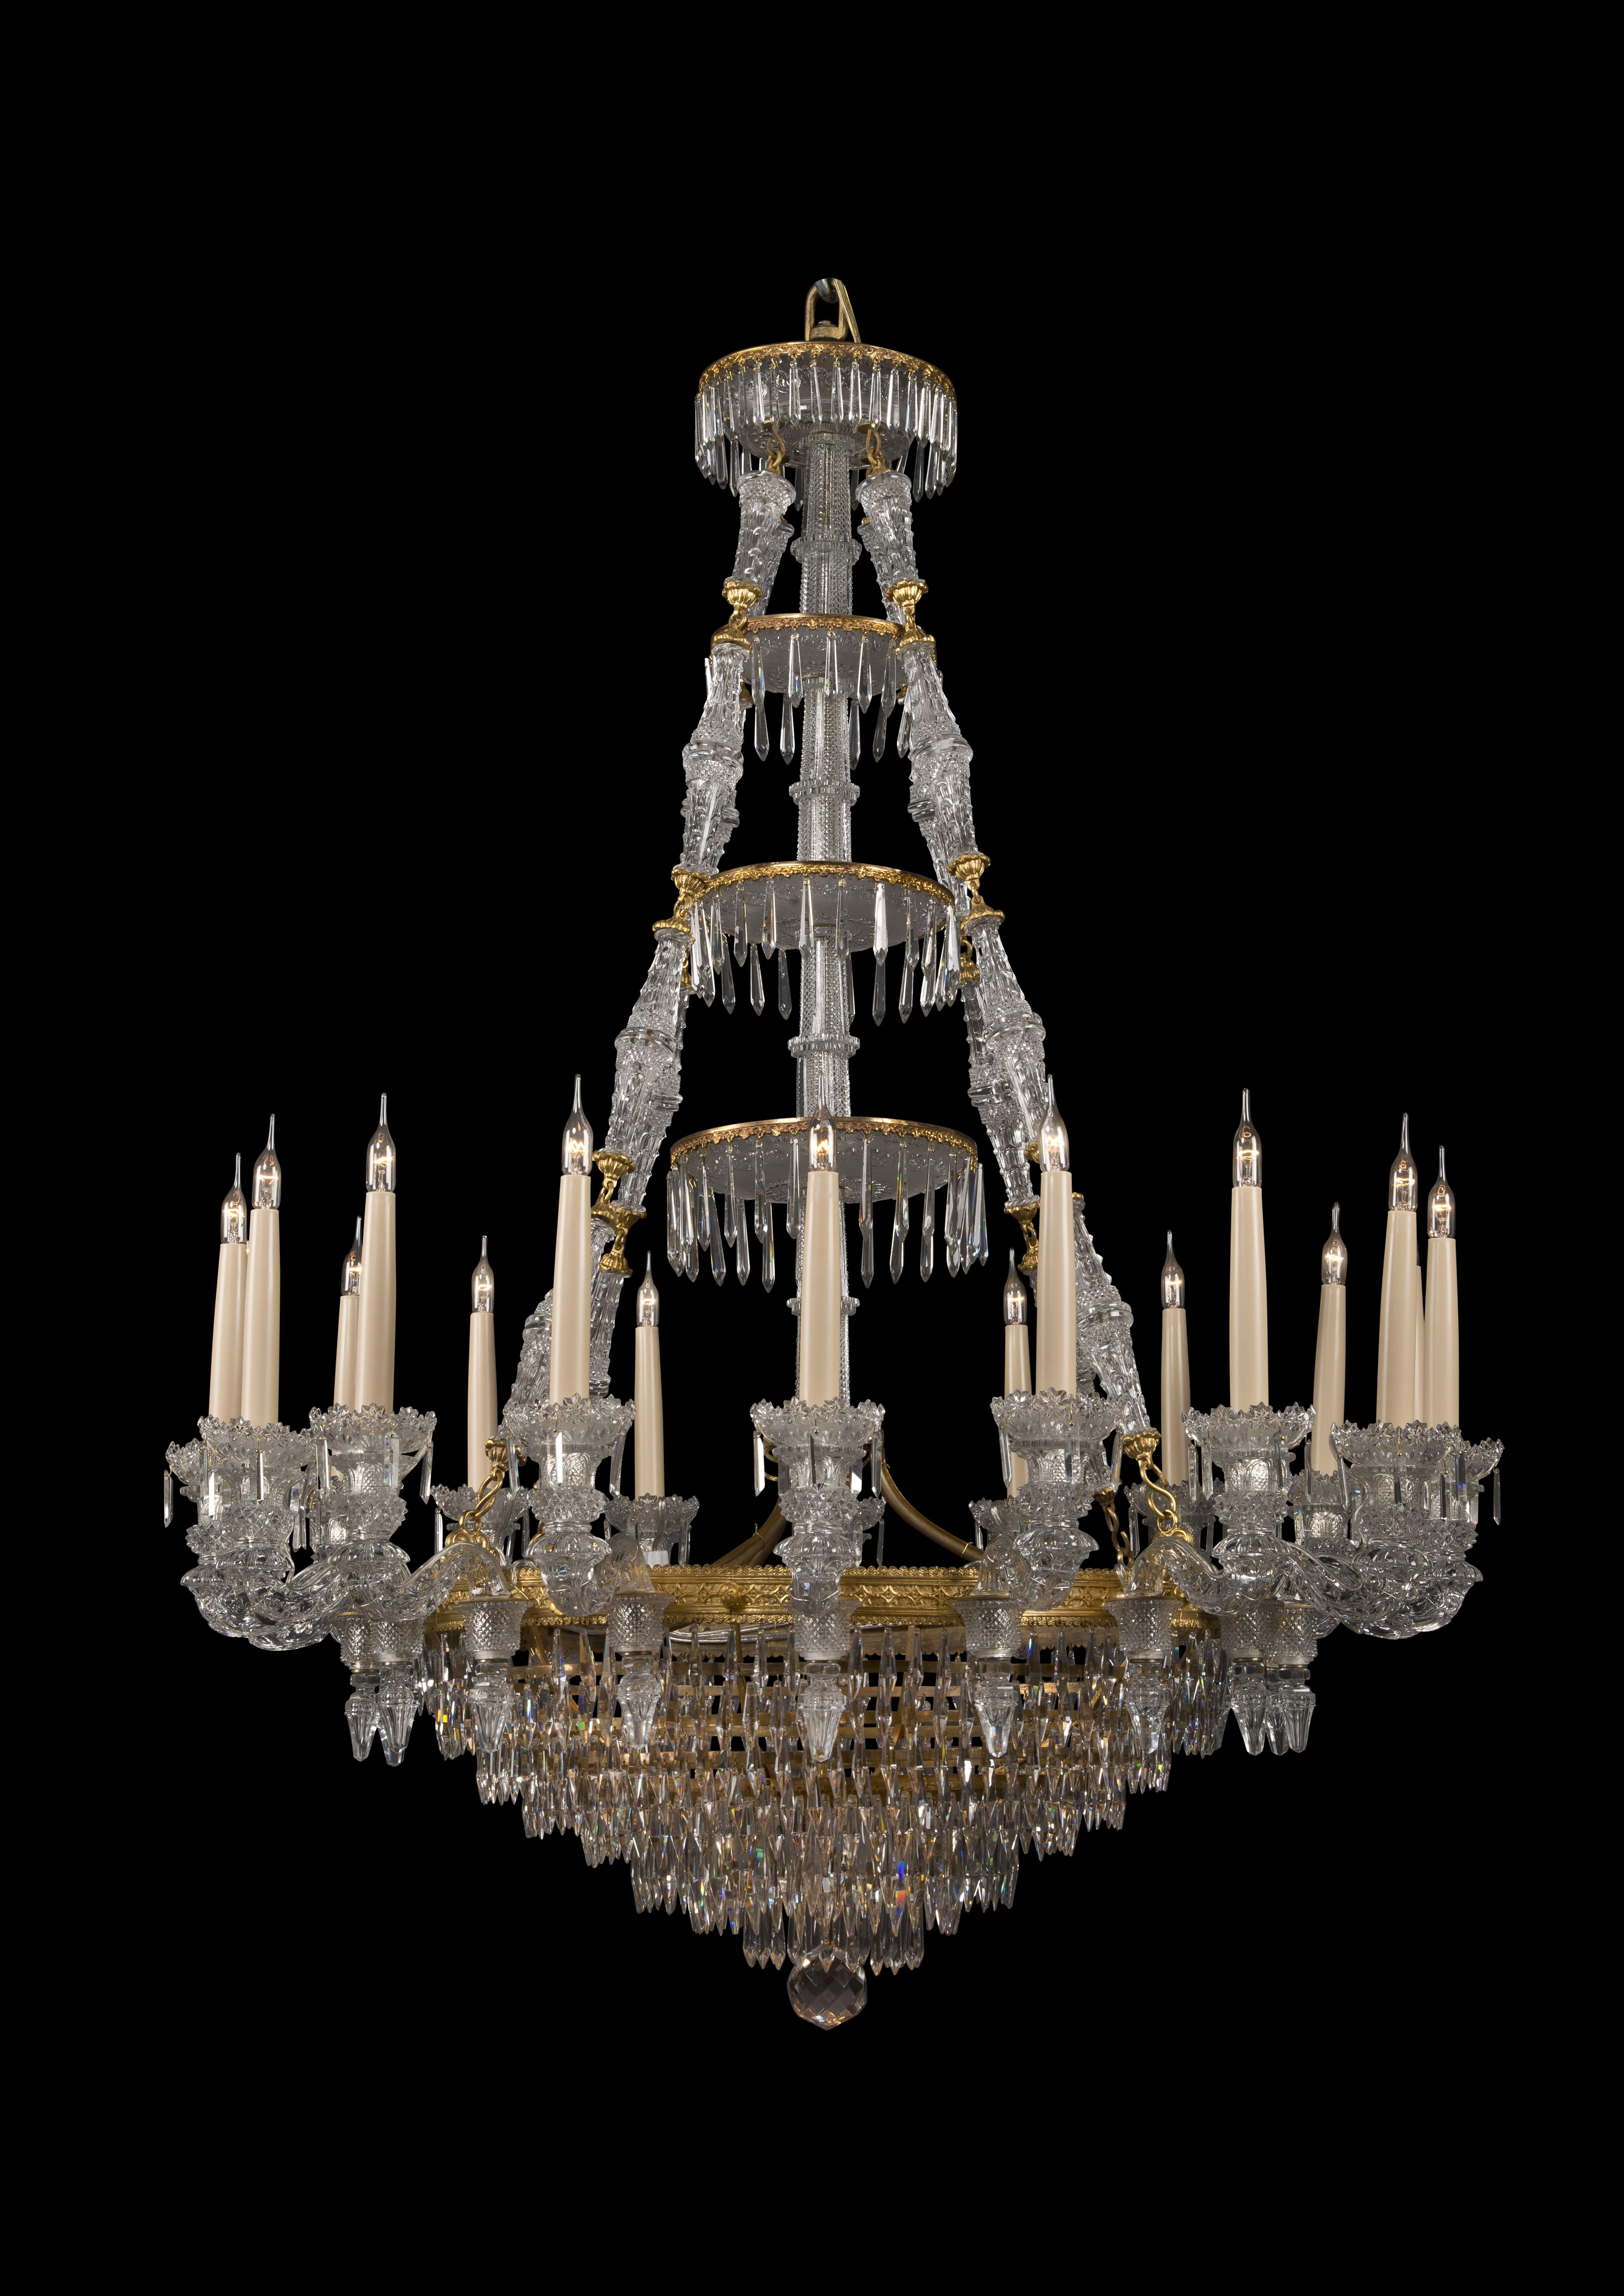 French Pair of Eighteen-Light Engraved Glass Chandeliers by Baccarat, circa 1860 For Sale